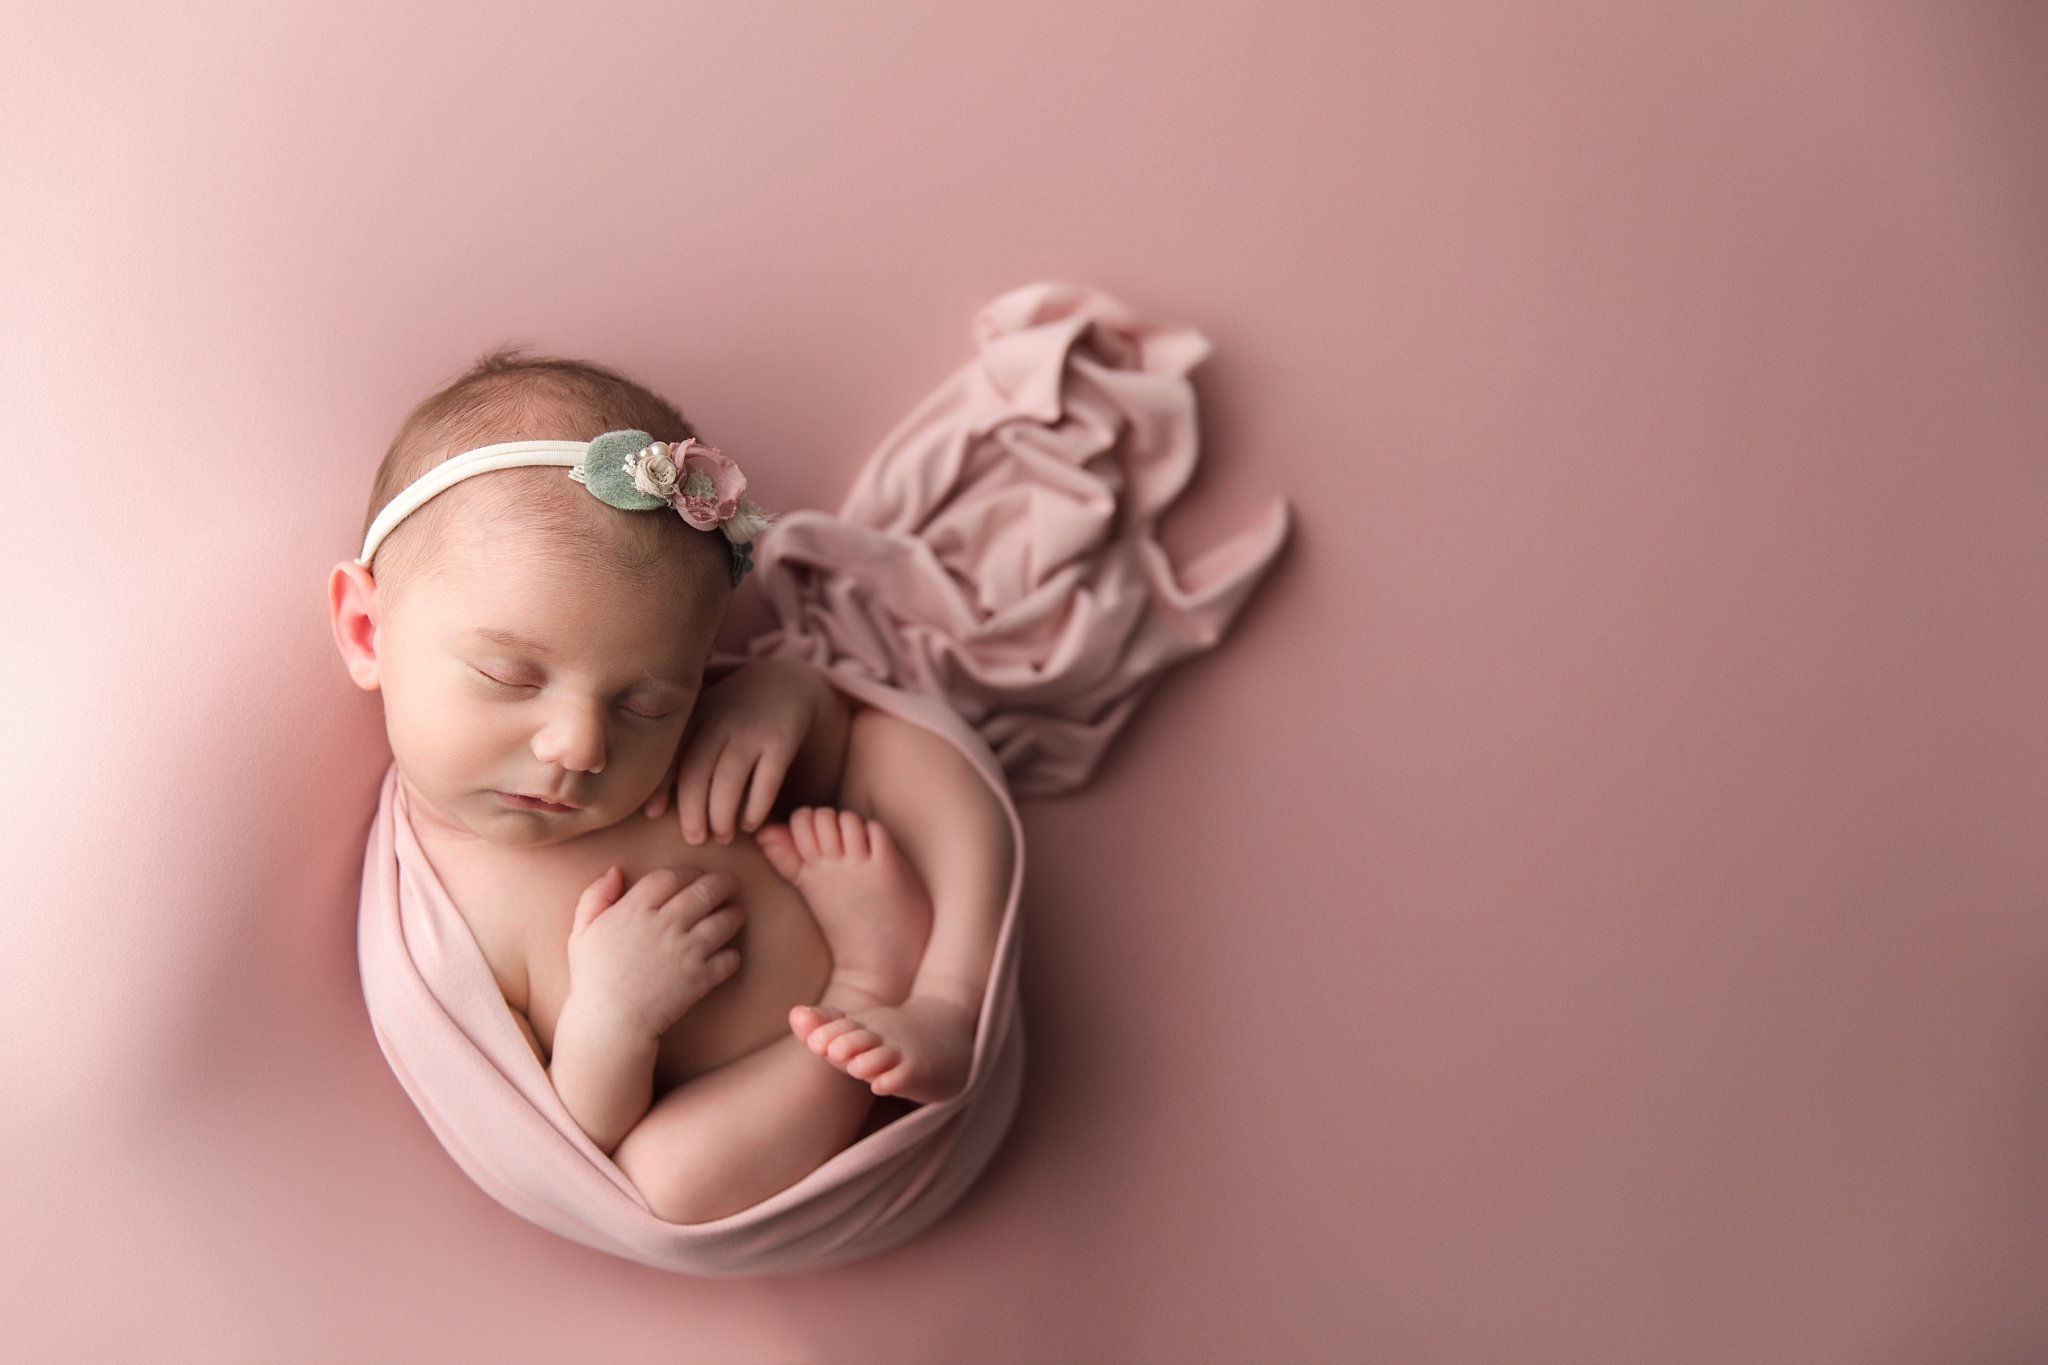 Sweet Baby Photos newborn phtoography dusty pink backdrop and wrap floral headband